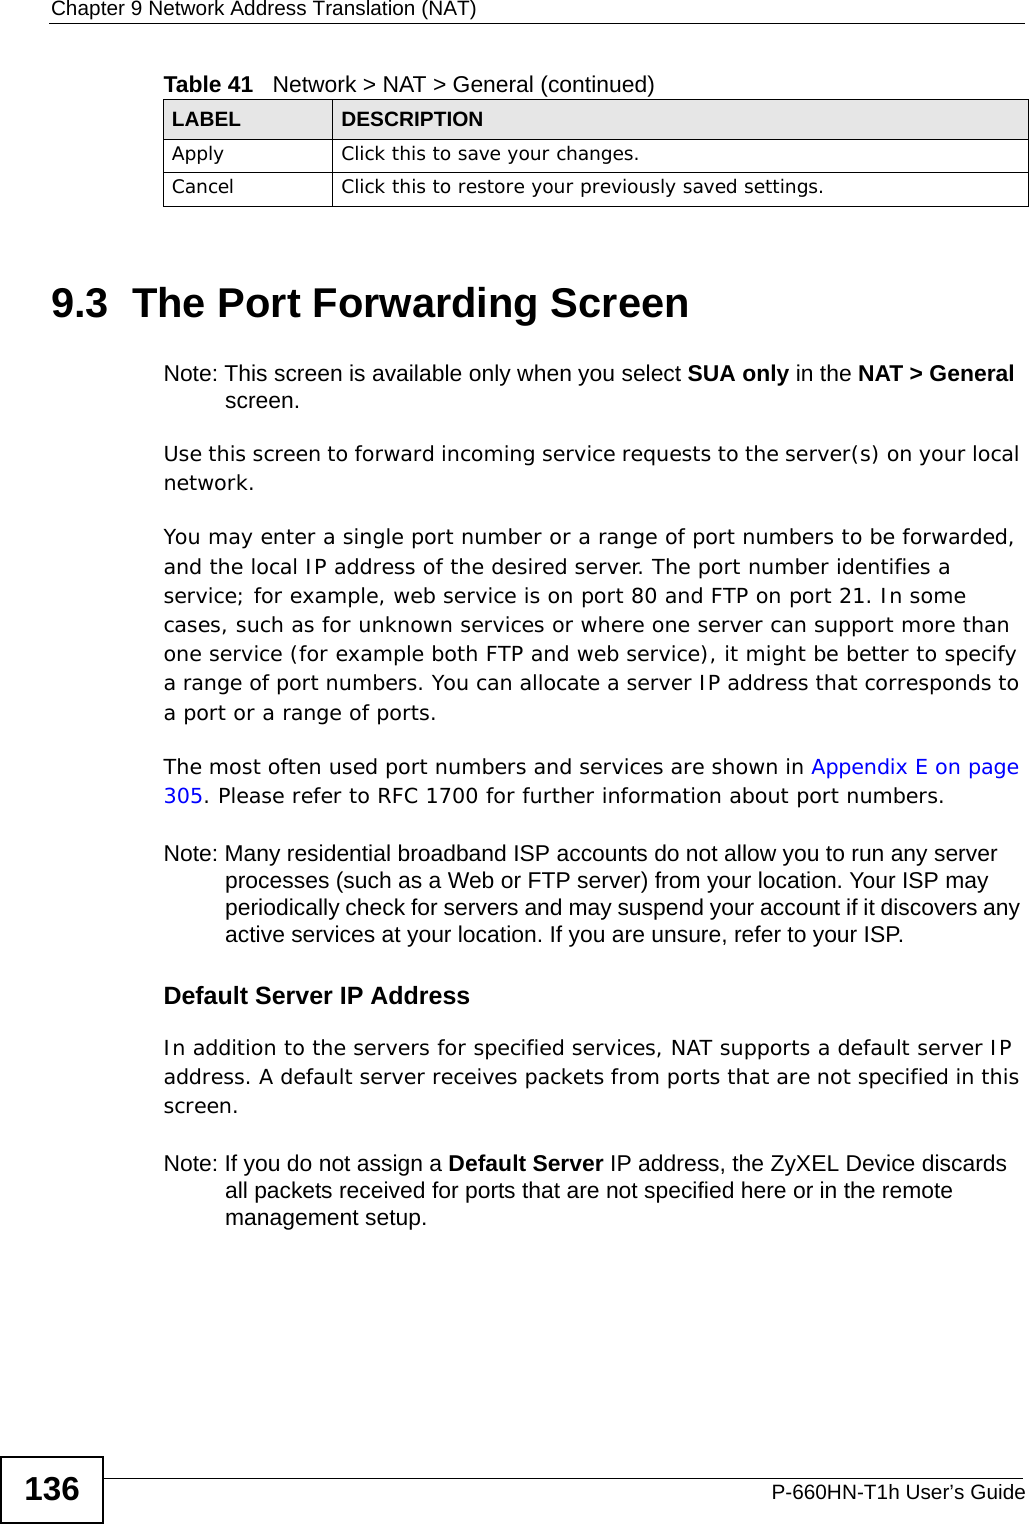 Chapter 9 Network Address Translation (NAT)P-660HN-T1h User’s Guide1369.3  The Port Forwarding ScreenNote: This screen is available only when you select SUA only in the NAT &gt; General screen.Use this screen to forward incoming service requests to the server(s) on your local network.You may enter a single port number or a range of port numbers to be forwarded, and the local IP address of the desired server. The port number identifies a service; for example, web service is on port 80 and FTP on port 21. In some cases, such as for unknown services or where one server can support more than one service (for example both FTP and web service), it might be better to specify a range of port numbers. You can allocate a server IP address that corresponds to a port or a range of ports.The most often used port numbers and services are shown in Appendix E on page 305. Please refer to RFC 1700 for further information about port numbers. Note: Many residential broadband ISP accounts do not allow you to run any server processes (such as a Web or FTP server) from your location. Your ISP may periodically check for servers and may suspend your account if it discovers any active services at your location. If you are unsure, refer to your ISP.Default Server IP AddressIn addition to the servers for specified services, NAT supports a default server IP address. A default server receives packets from ports that are not specified in this screen.Note: If you do not assign a Default Server IP address, the ZyXEL Device discards all packets received for ports that are not specified here or in the remote management setup.Apply Click this to save your changes.Cancel Click this to restore your previously saved settings.Table 41   Network &gt; NAT &gt; General (continued)LABEL DESCRIPTION